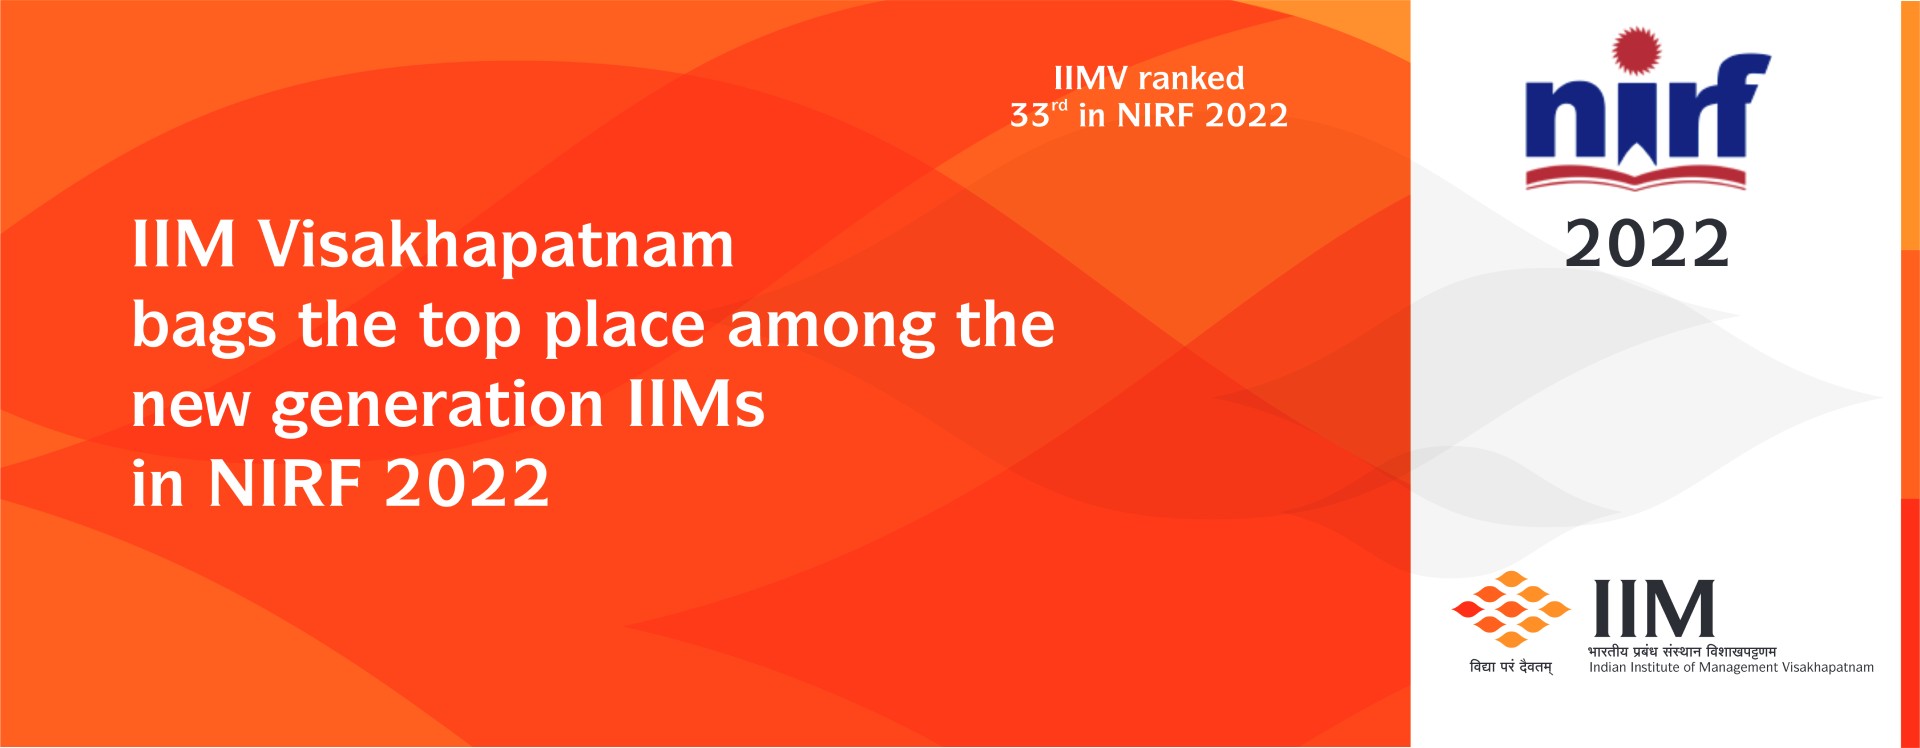 IIM Visakhapatnam bags the top place among the new generation IIMs in NIRF 2022